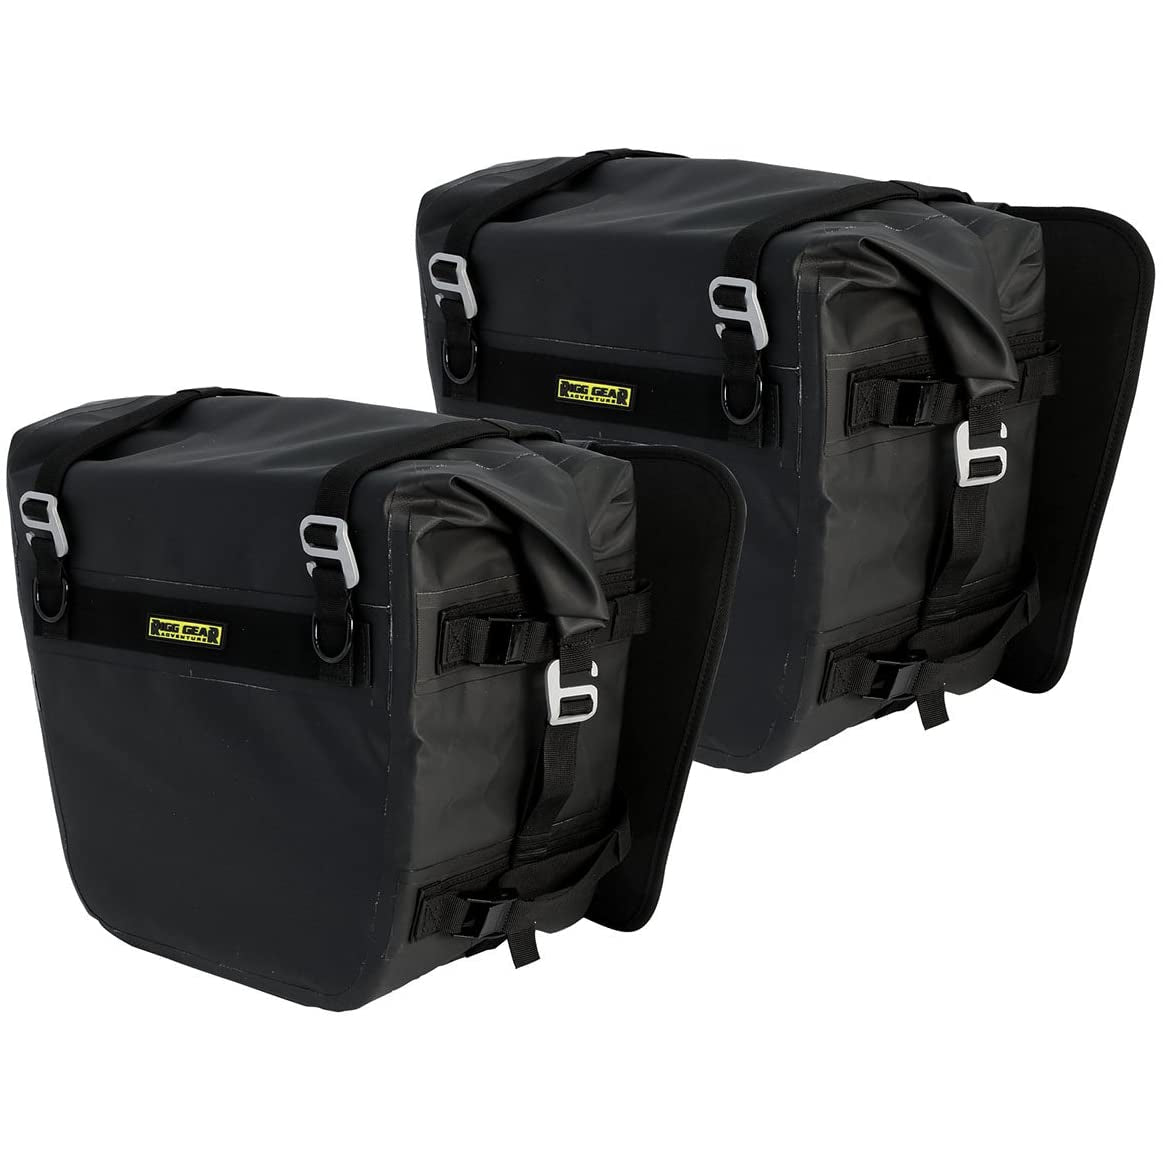 Rigg Gear Adventure SE-3050 Deluxe Adventure Motorcycle Dry Saddlebags